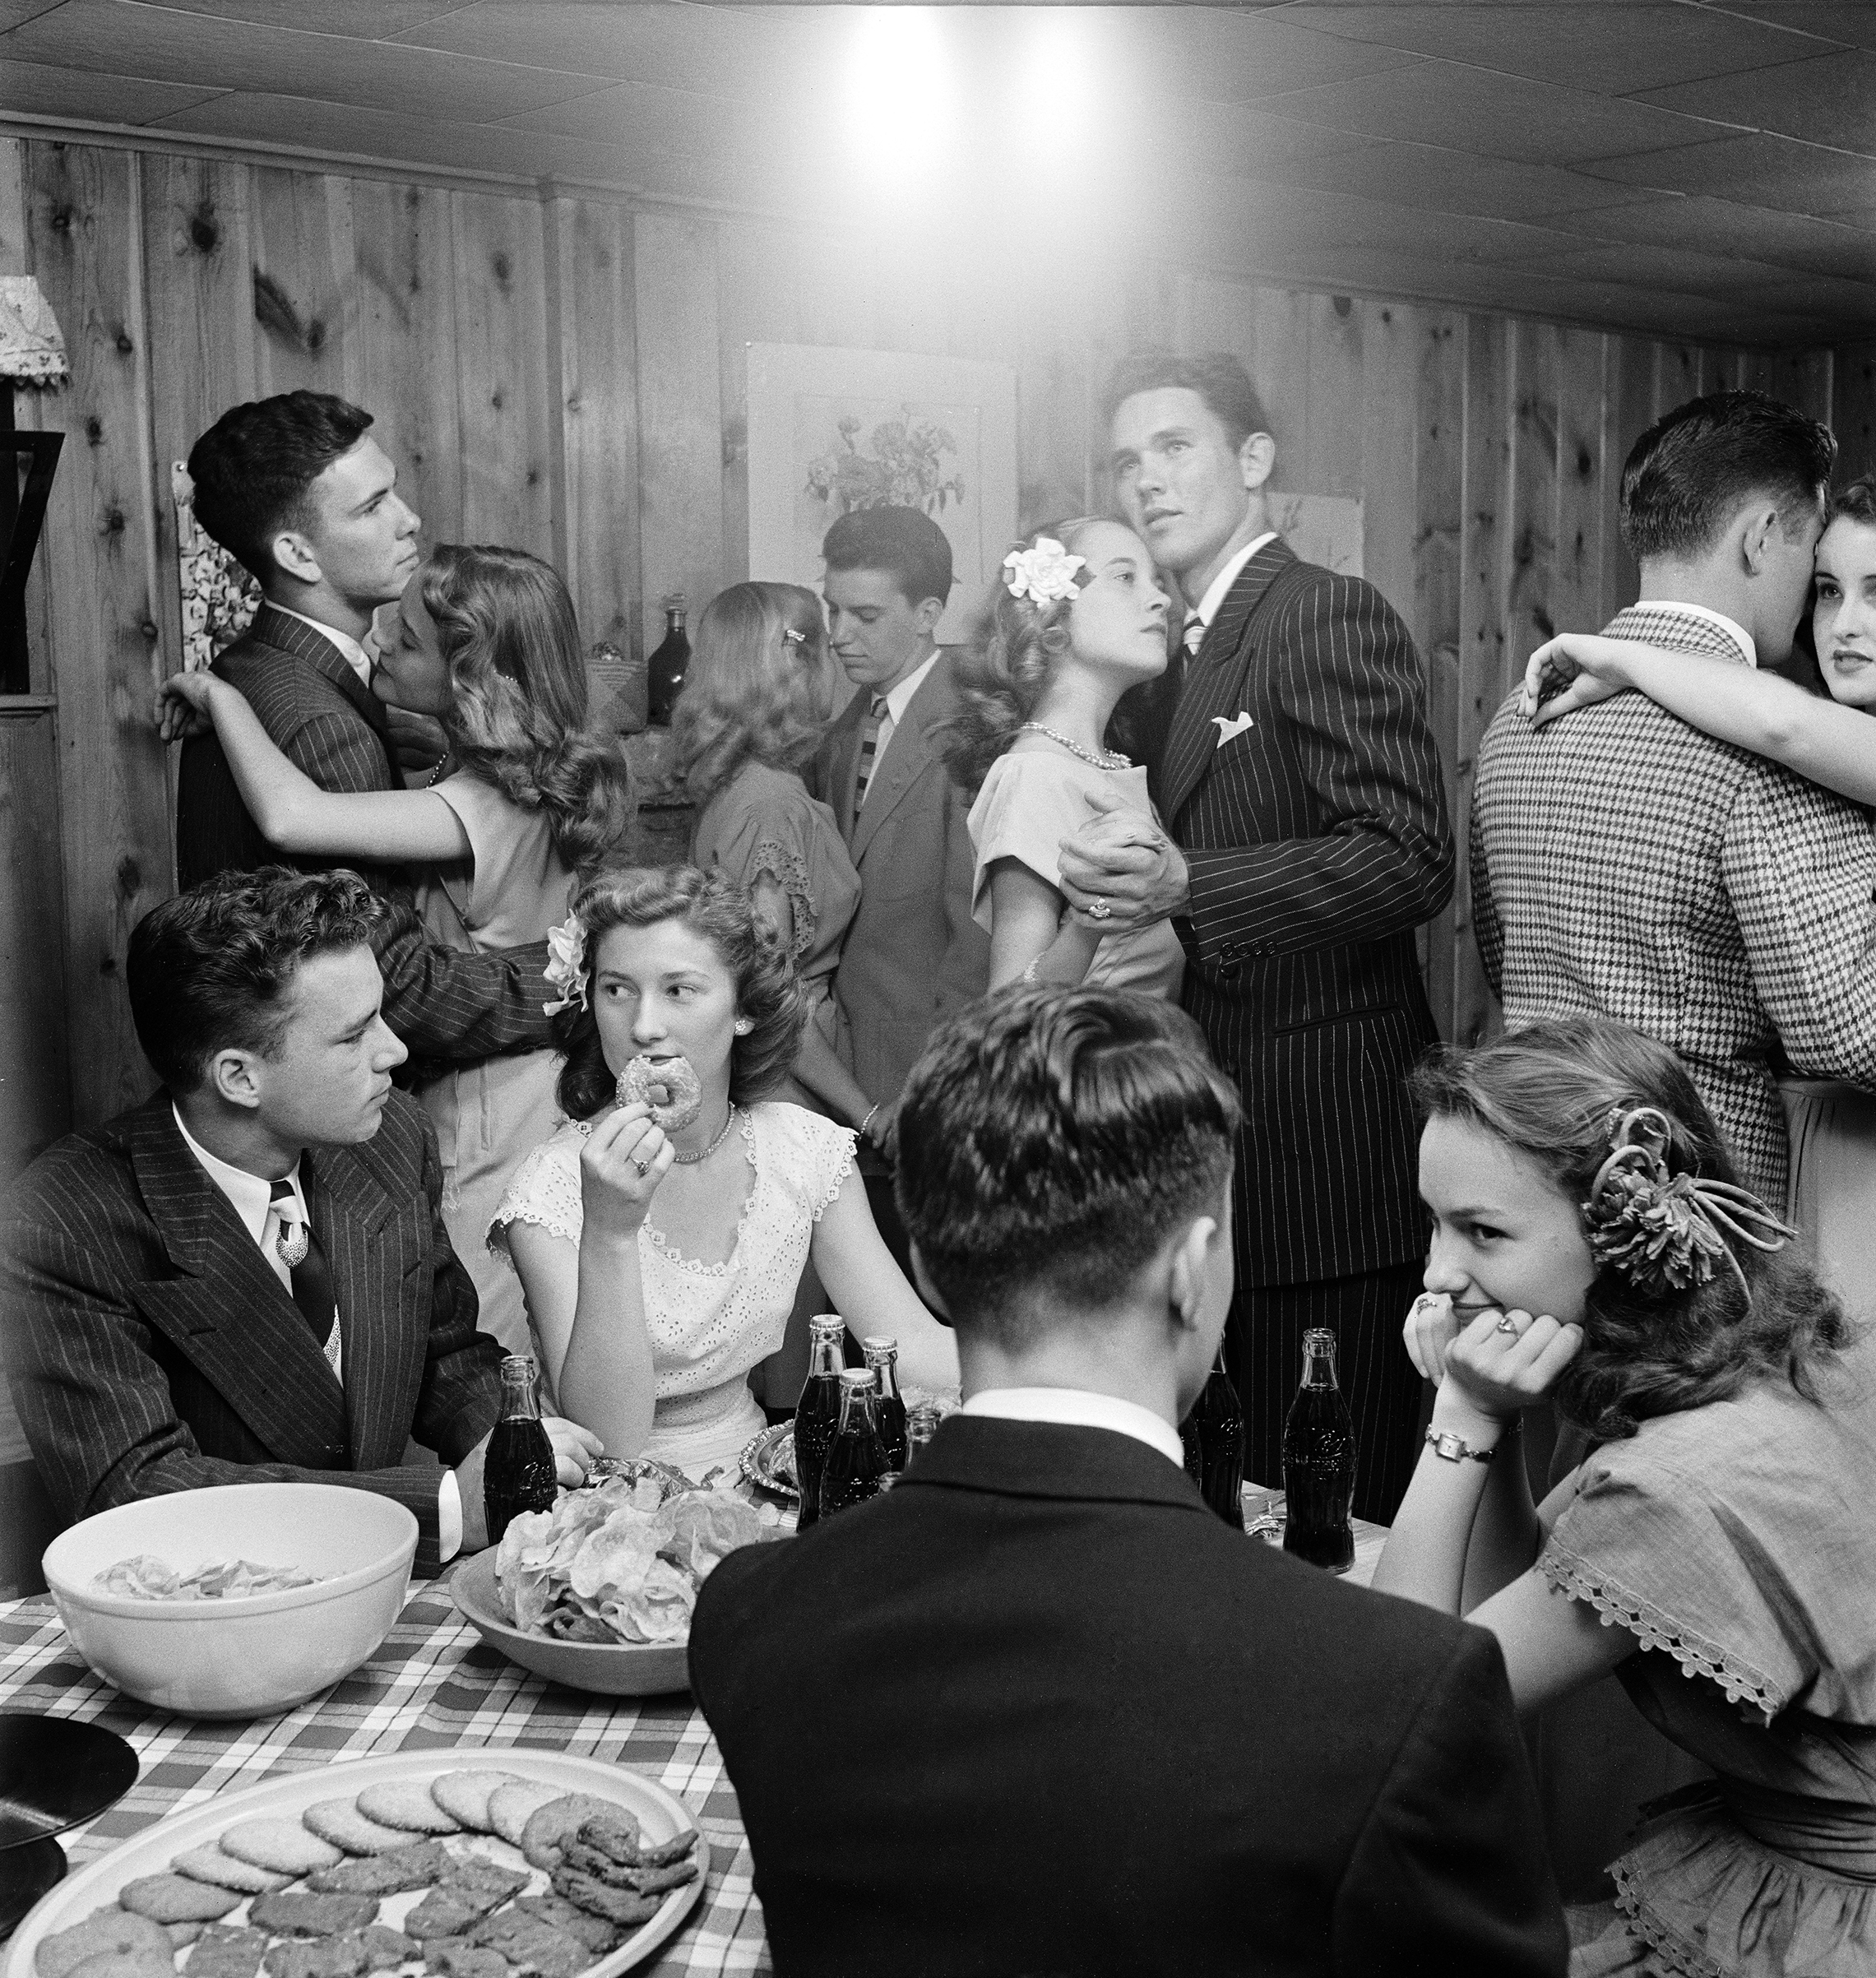 Teenagers dancing and socializing at a party, 1947.